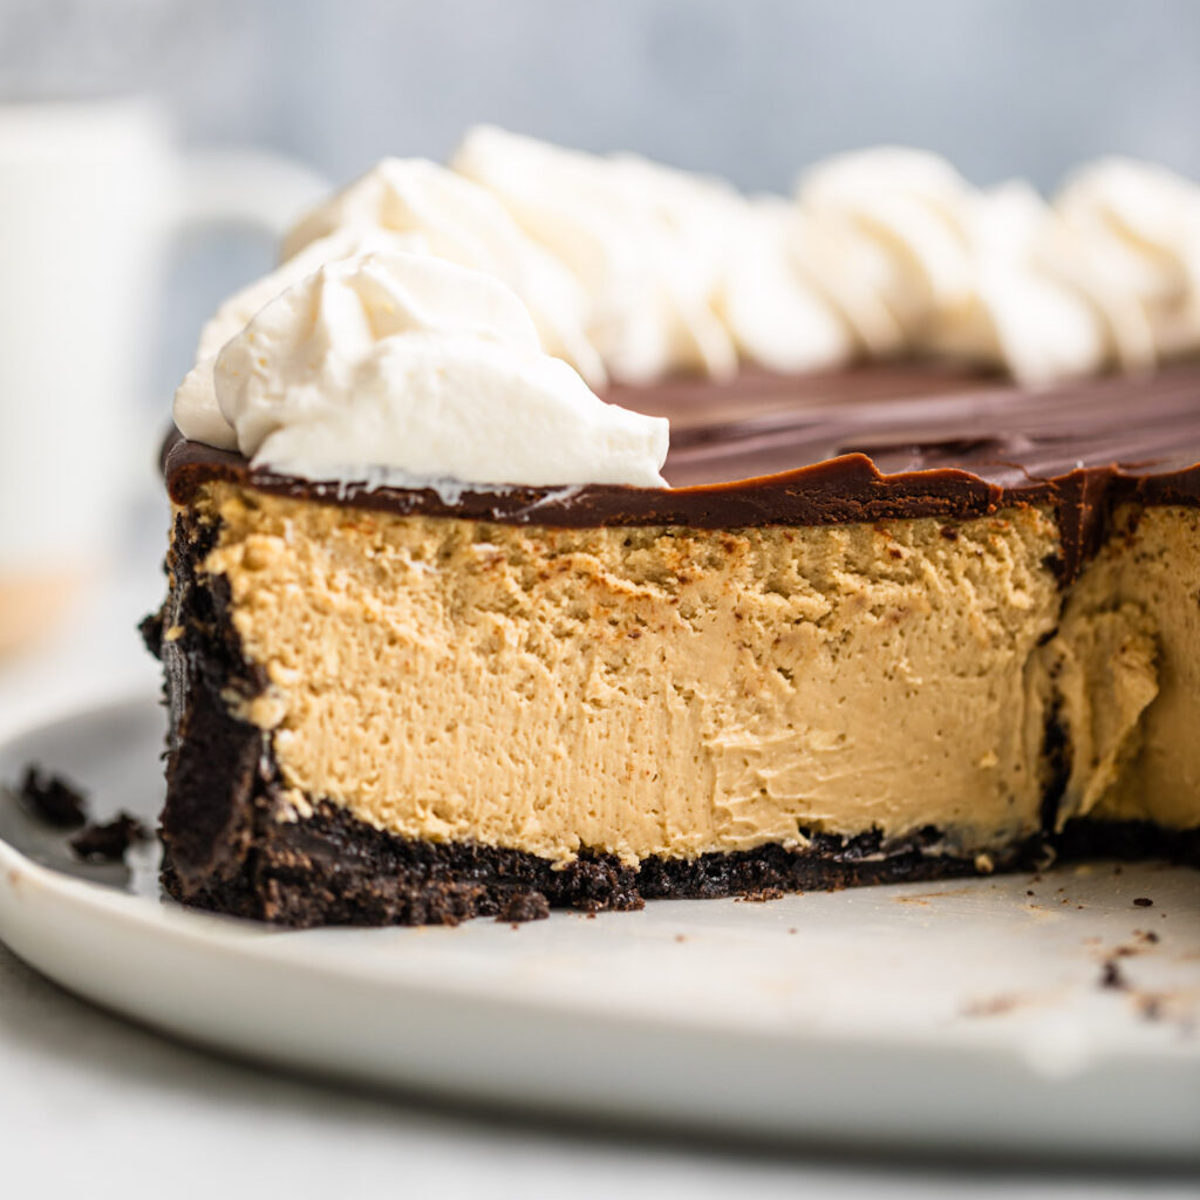 Baked Coffee Cheesecake Recipe {Step-by-Step Photos}